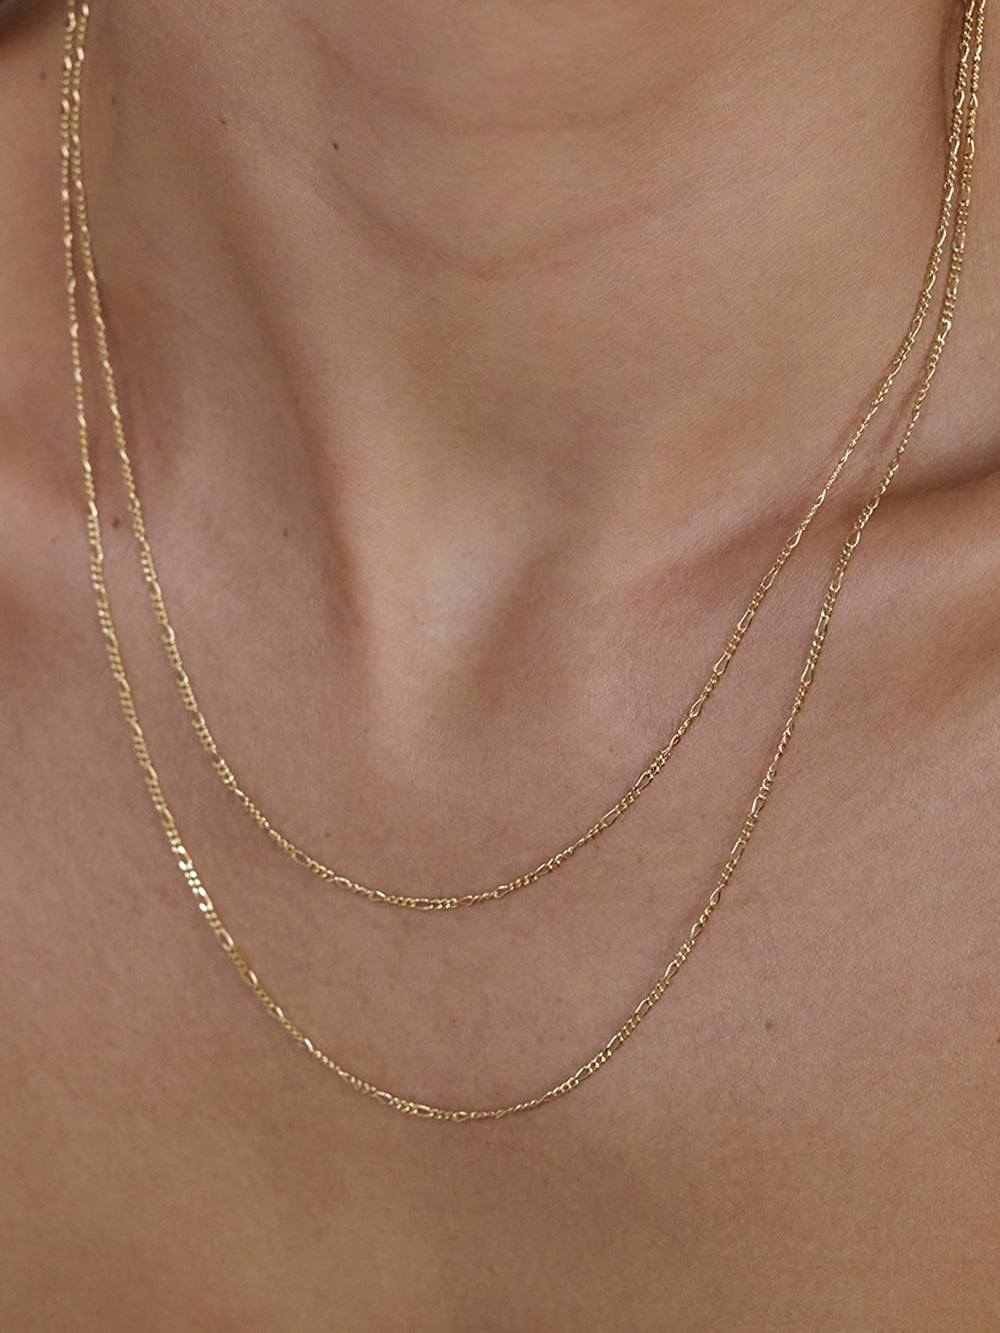 All of me | 14K Gold Plated